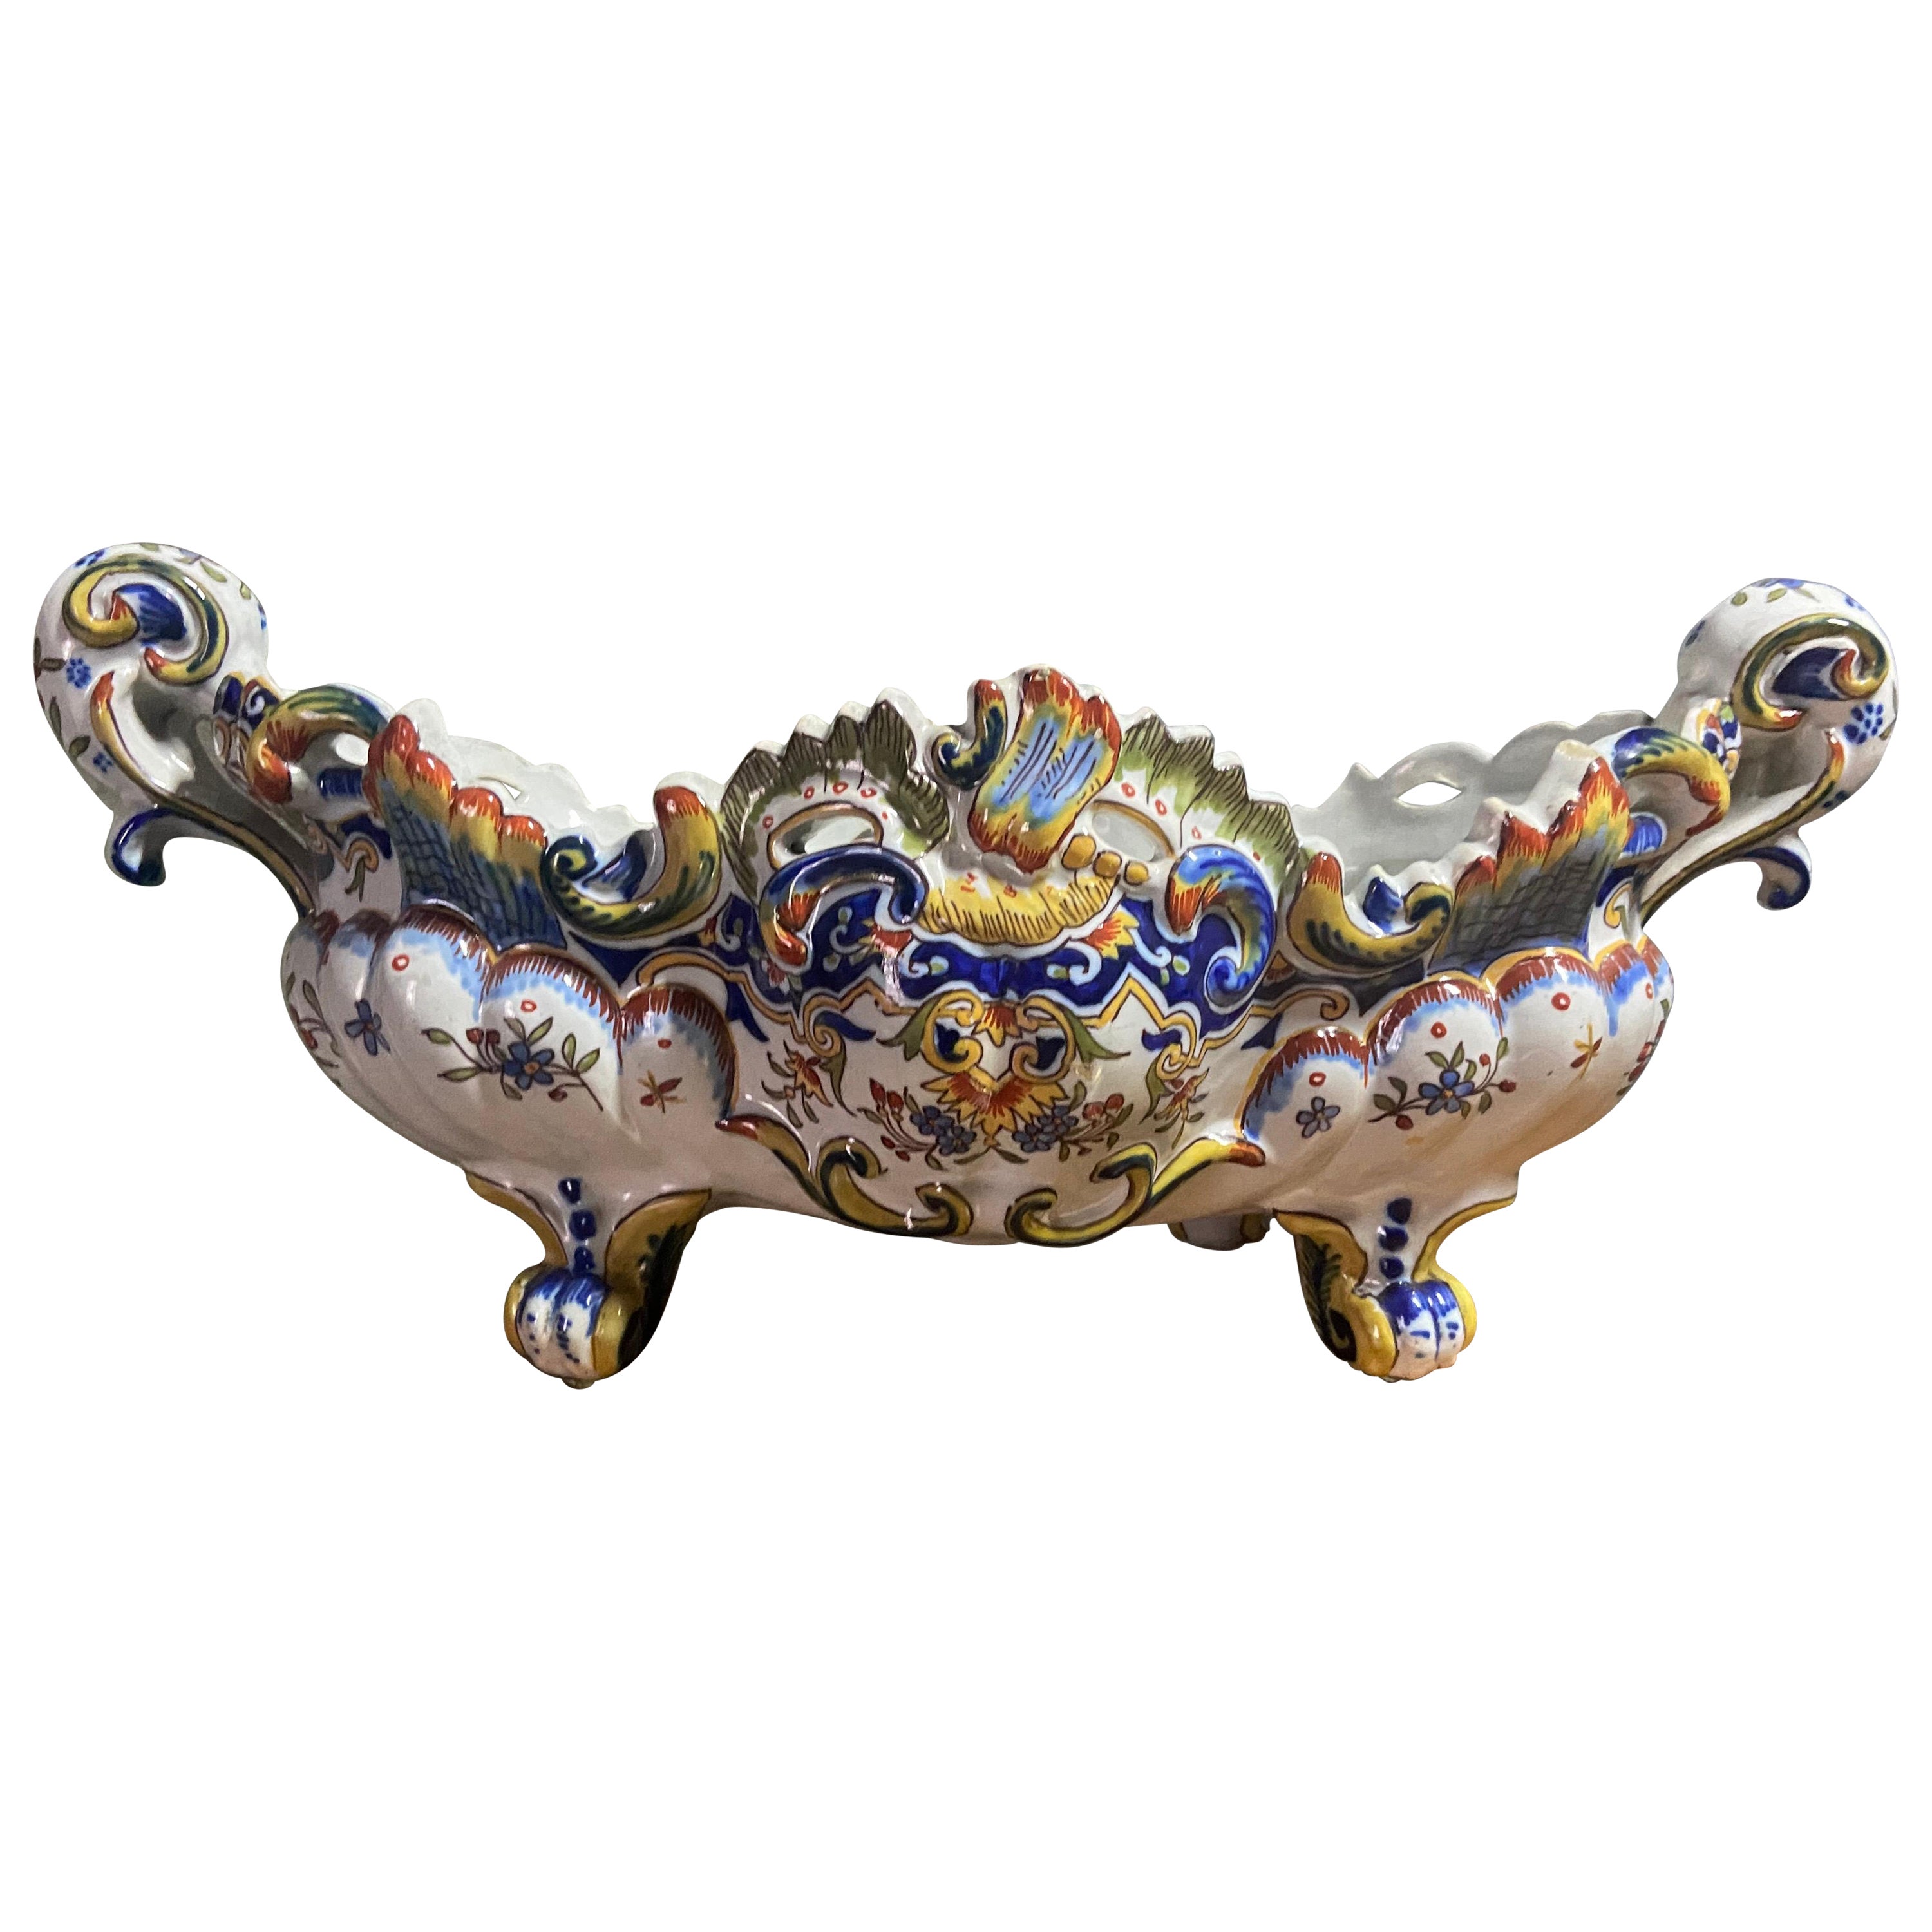 Late 19th Century French Polychromatic Desvres Ceramic Jardiniere Centrepiece For Sale